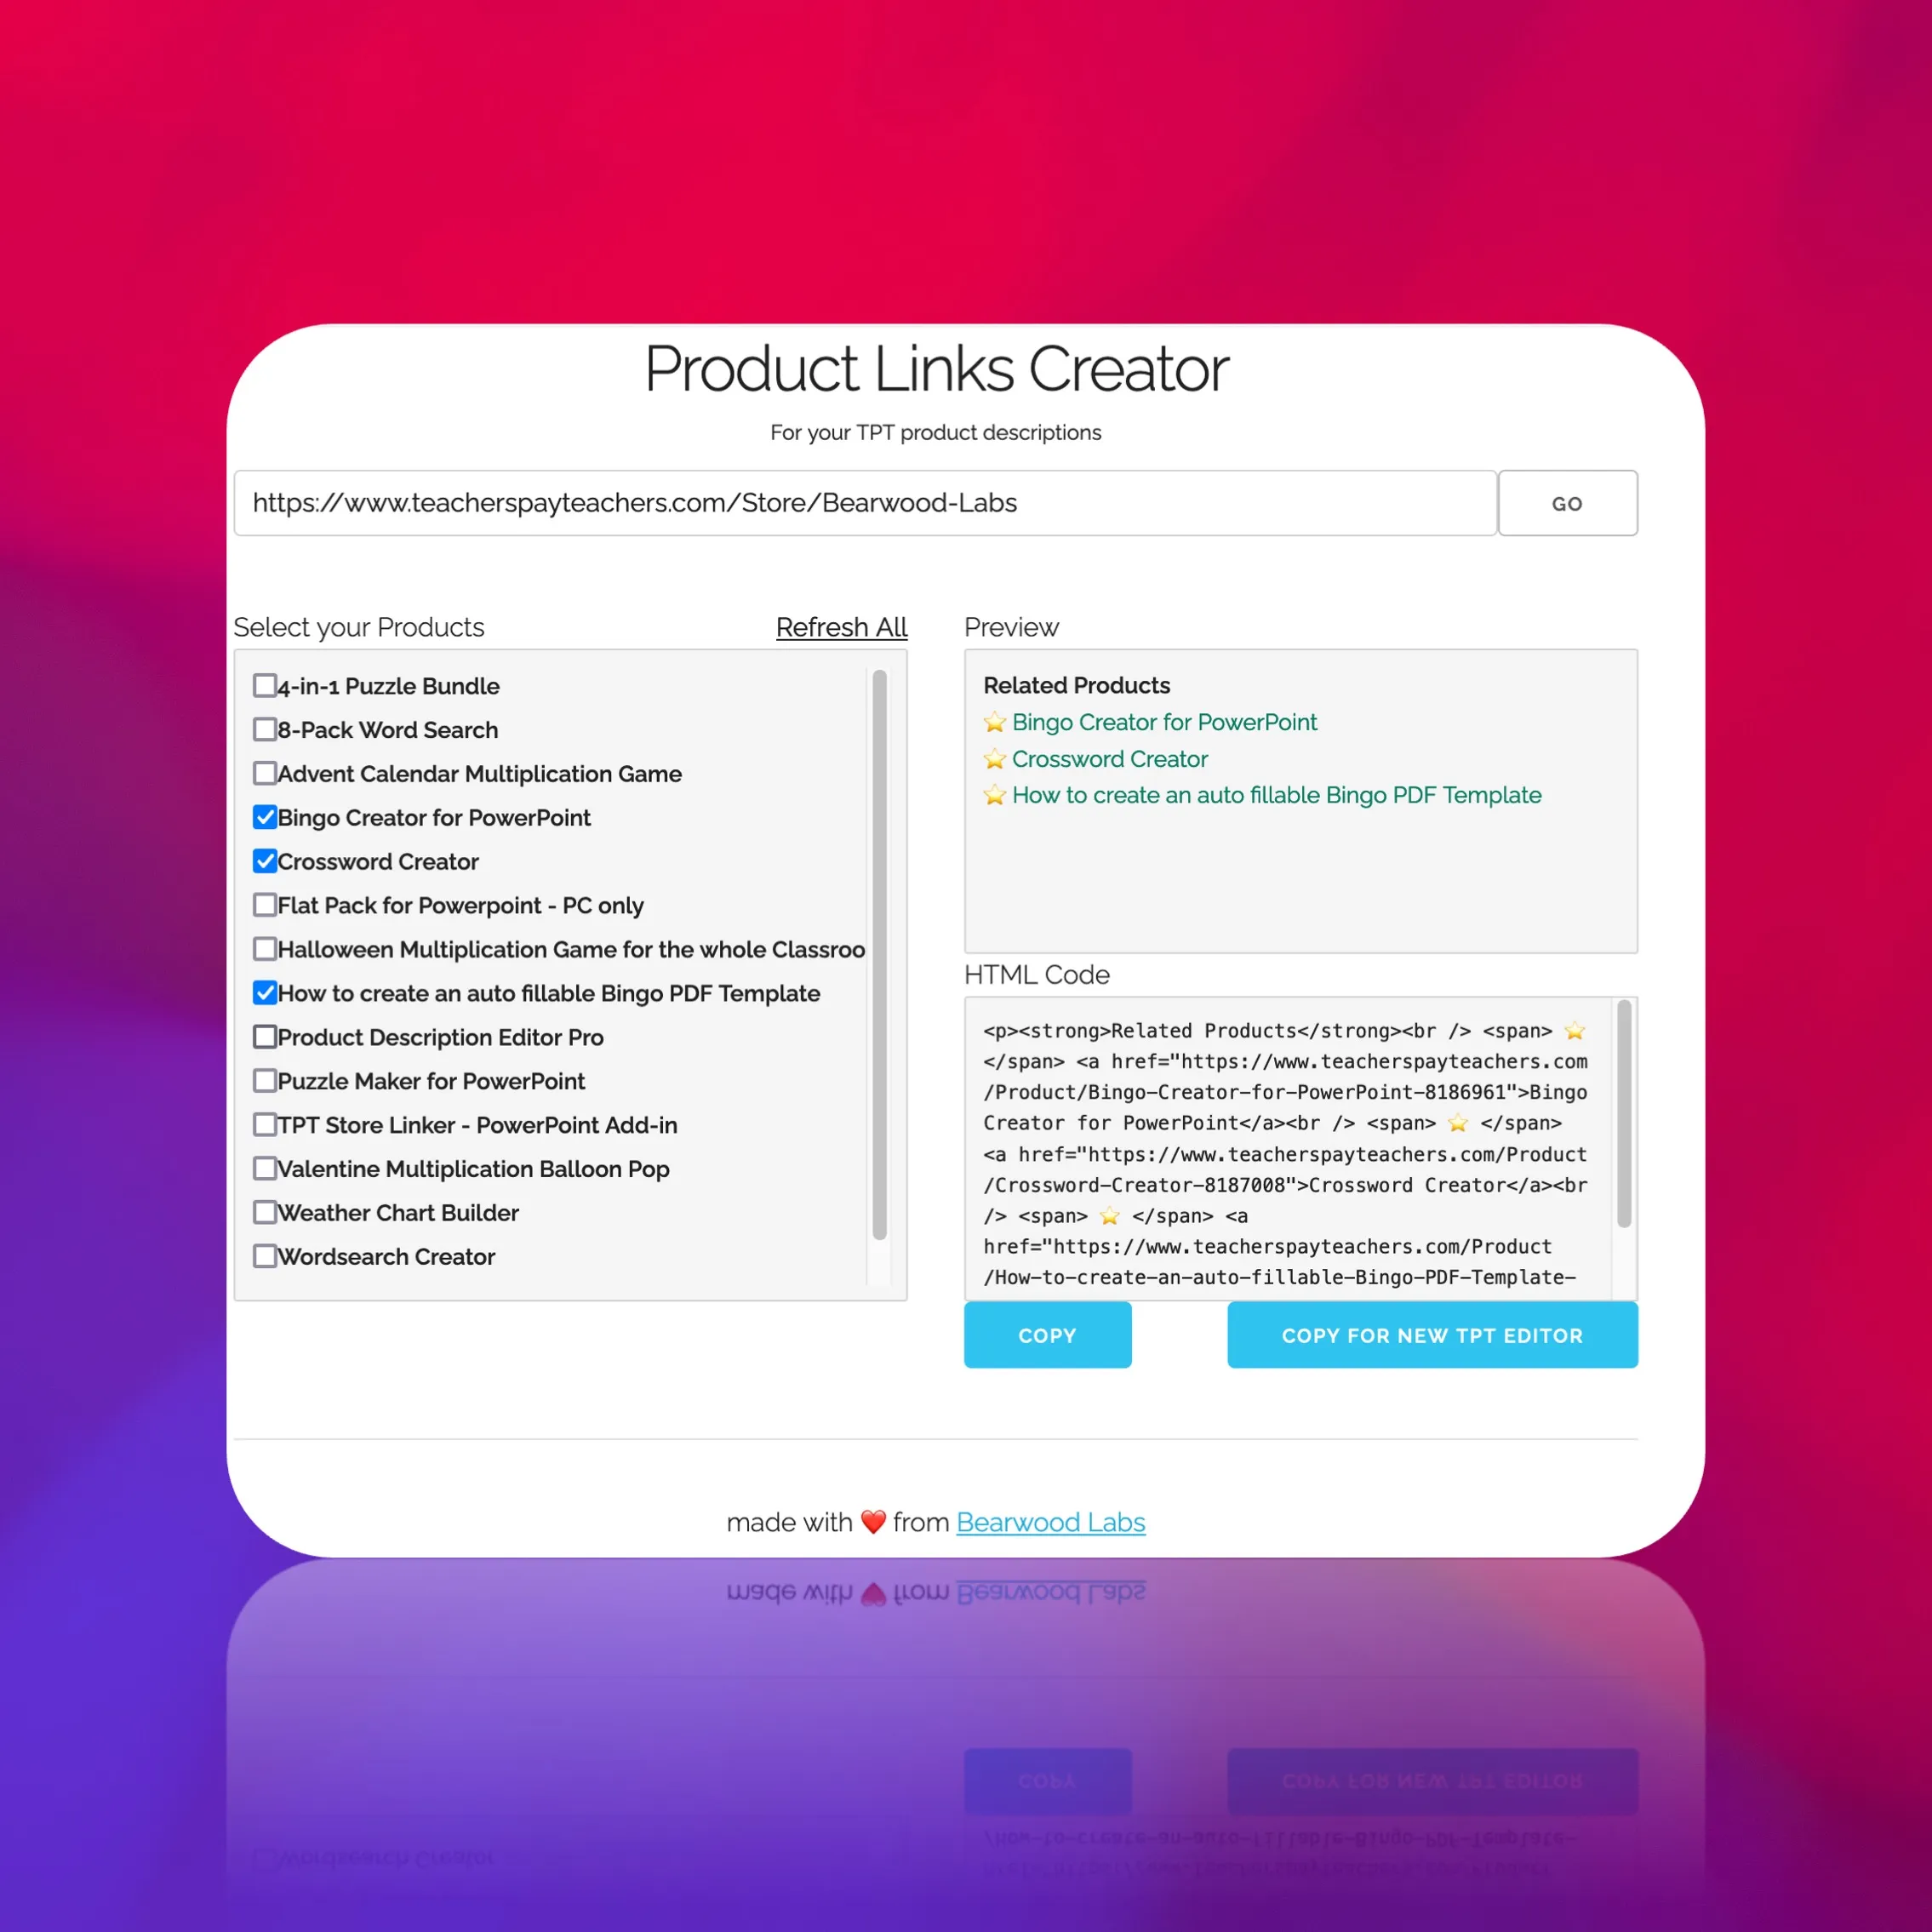 Generate related product links for your descriptions